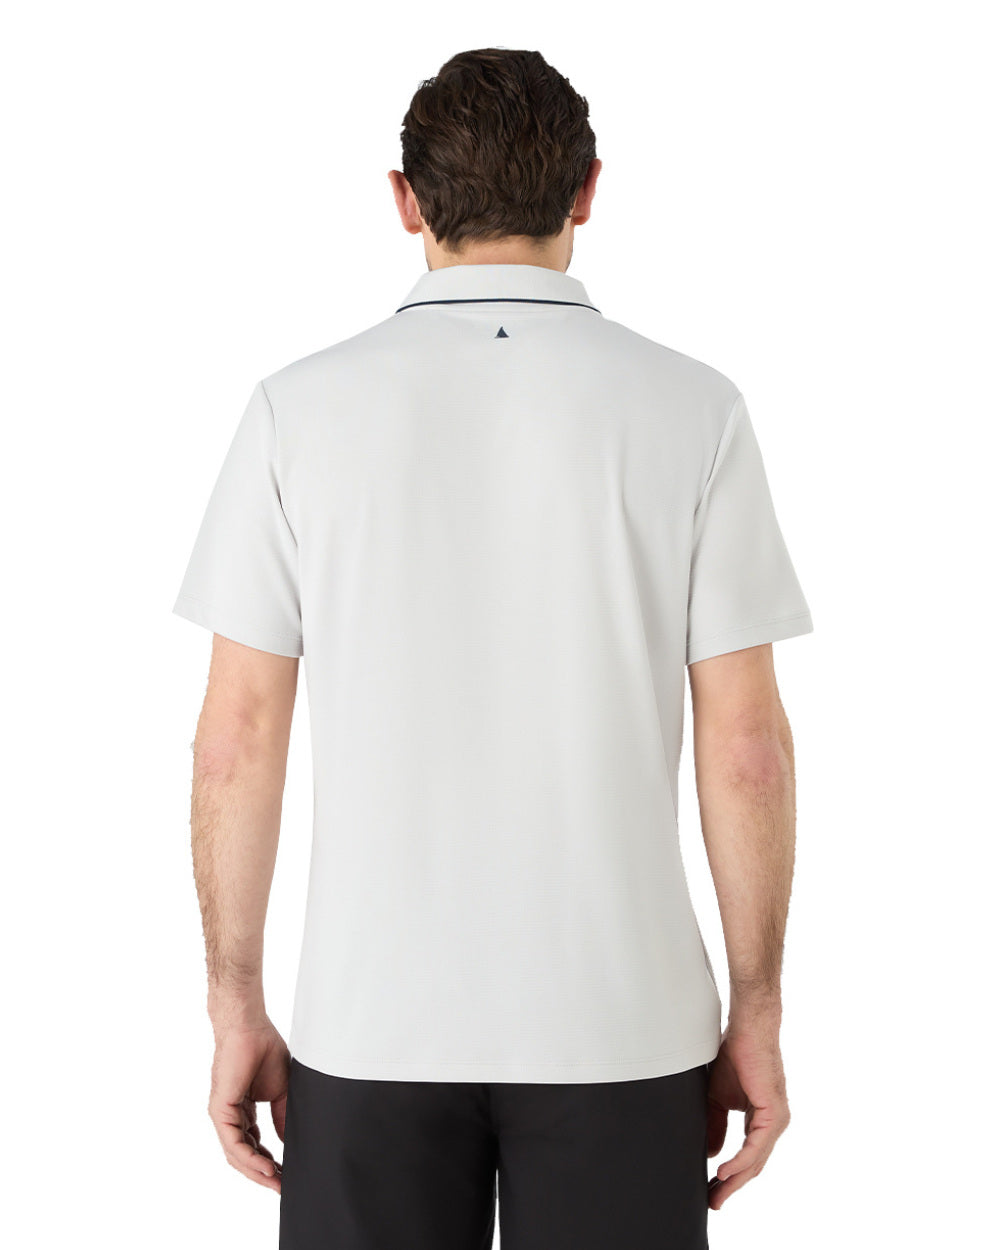 Platinum Coloured Musto Mens 1964 Short Sleeve Polo Shirt On A White Background 